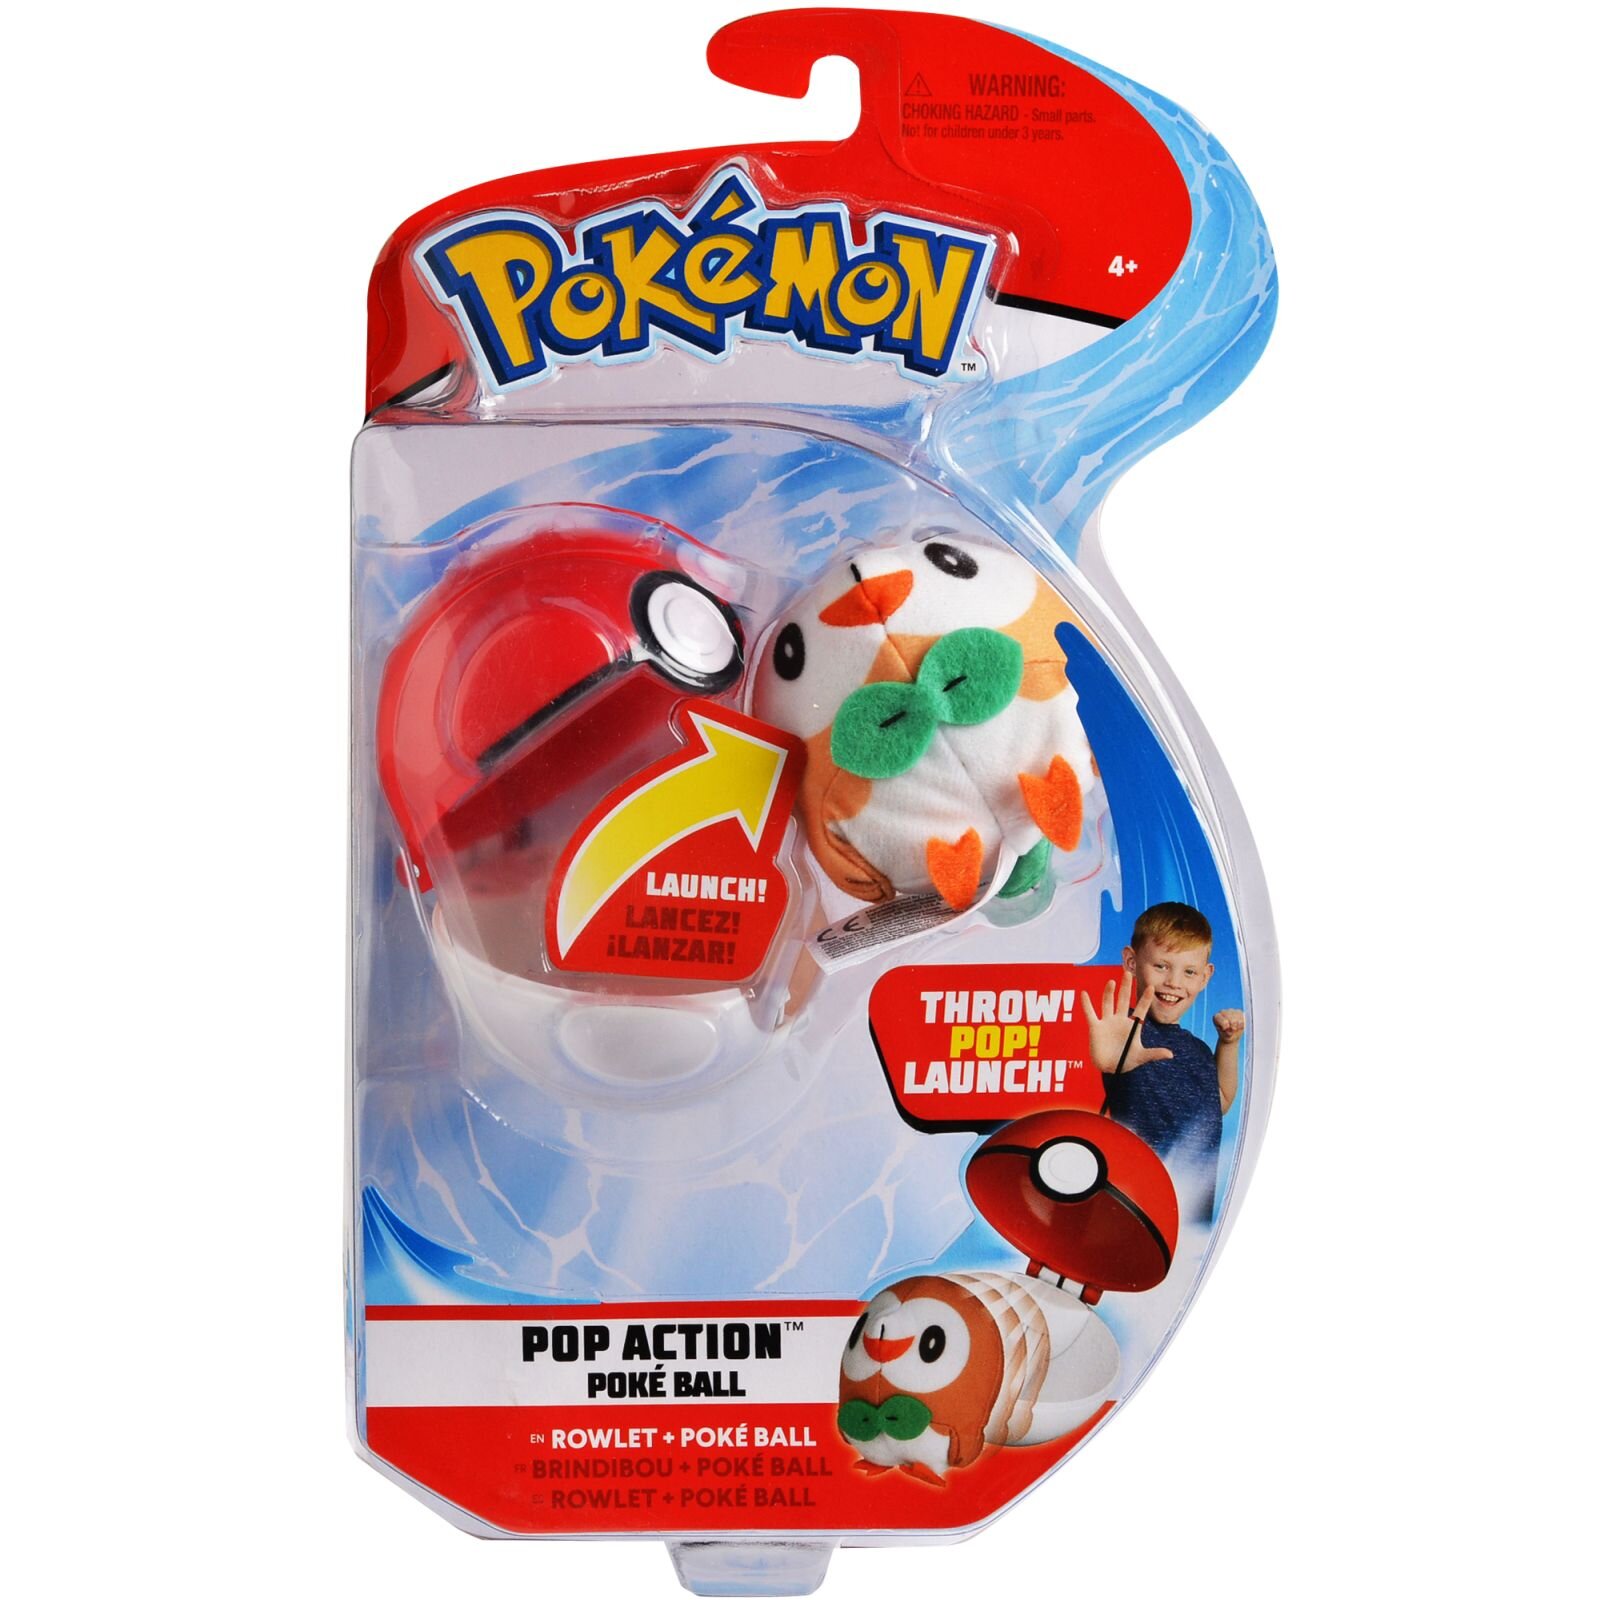 Pokémon Galar Region 8-Inch Plush Stuffed Toy For Kids, Assorted  Characters, Ages 2+